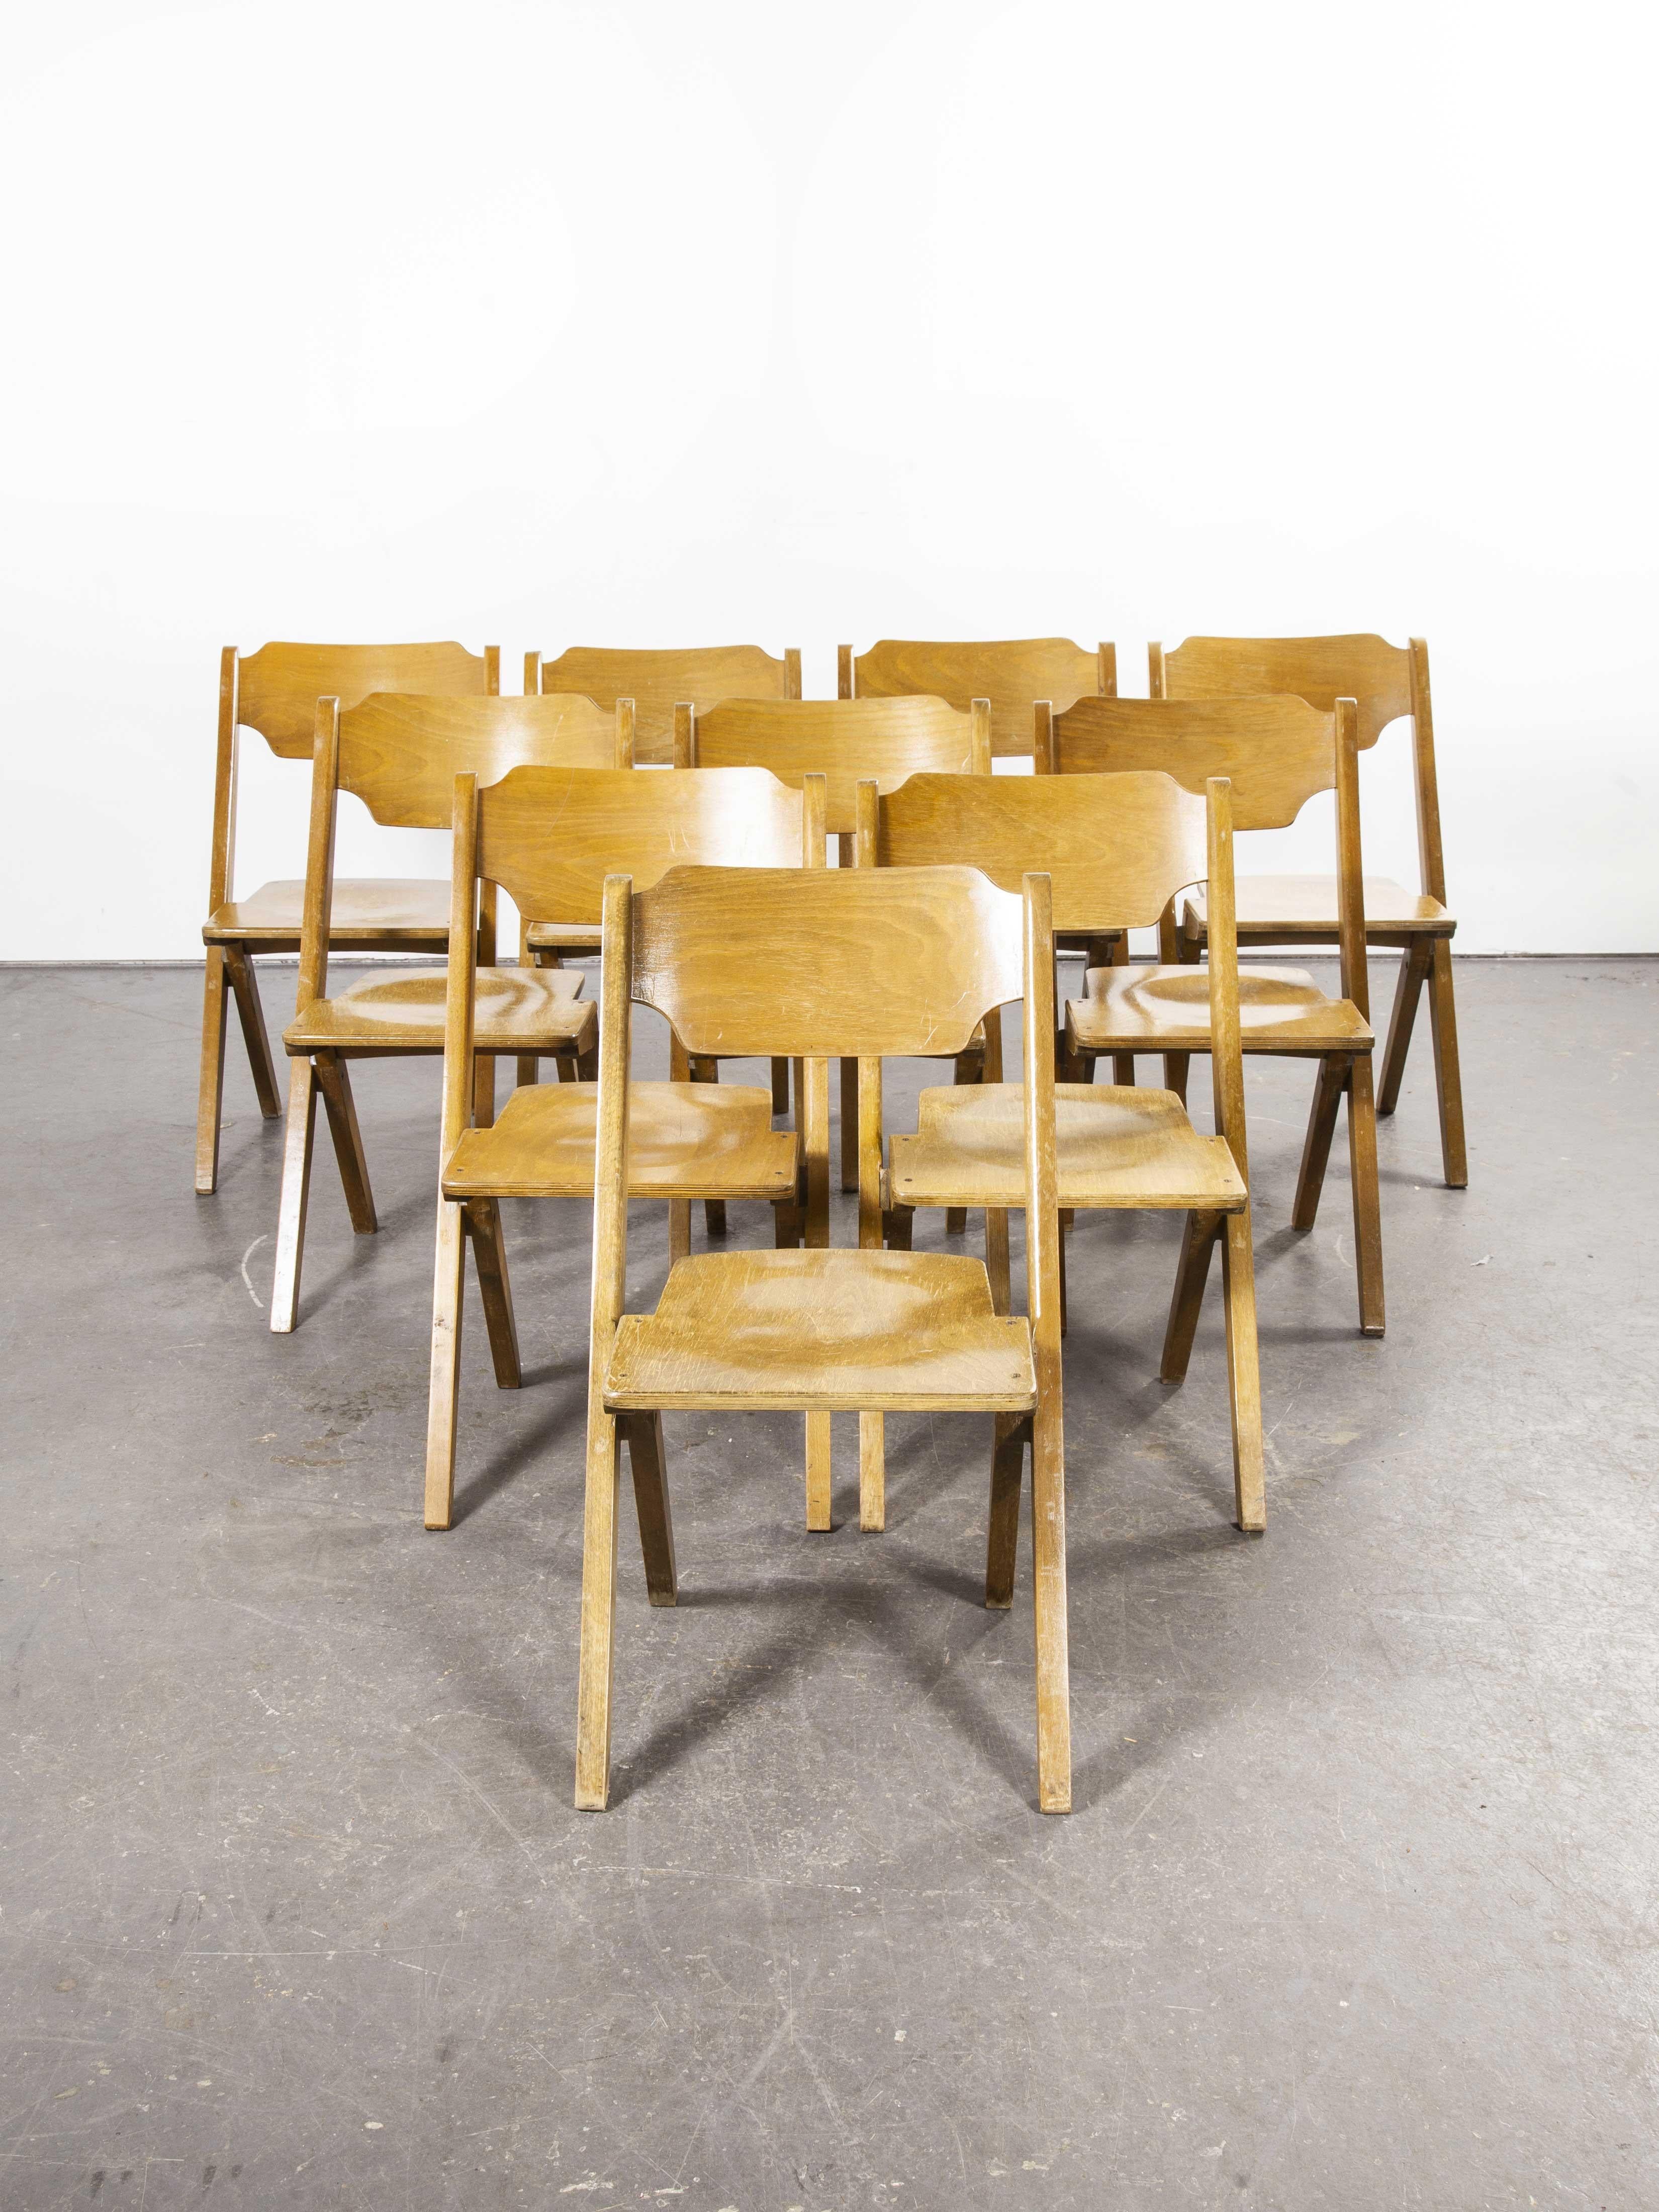 1960s Bombenstabil stacking beech dining chairs – set of ten. We believe these chairs were made by Bombenstabil in Germany in the 1950s. They have the aesthetic of a folding chair but they are rigid fixed chairs that by their design stack incredibly